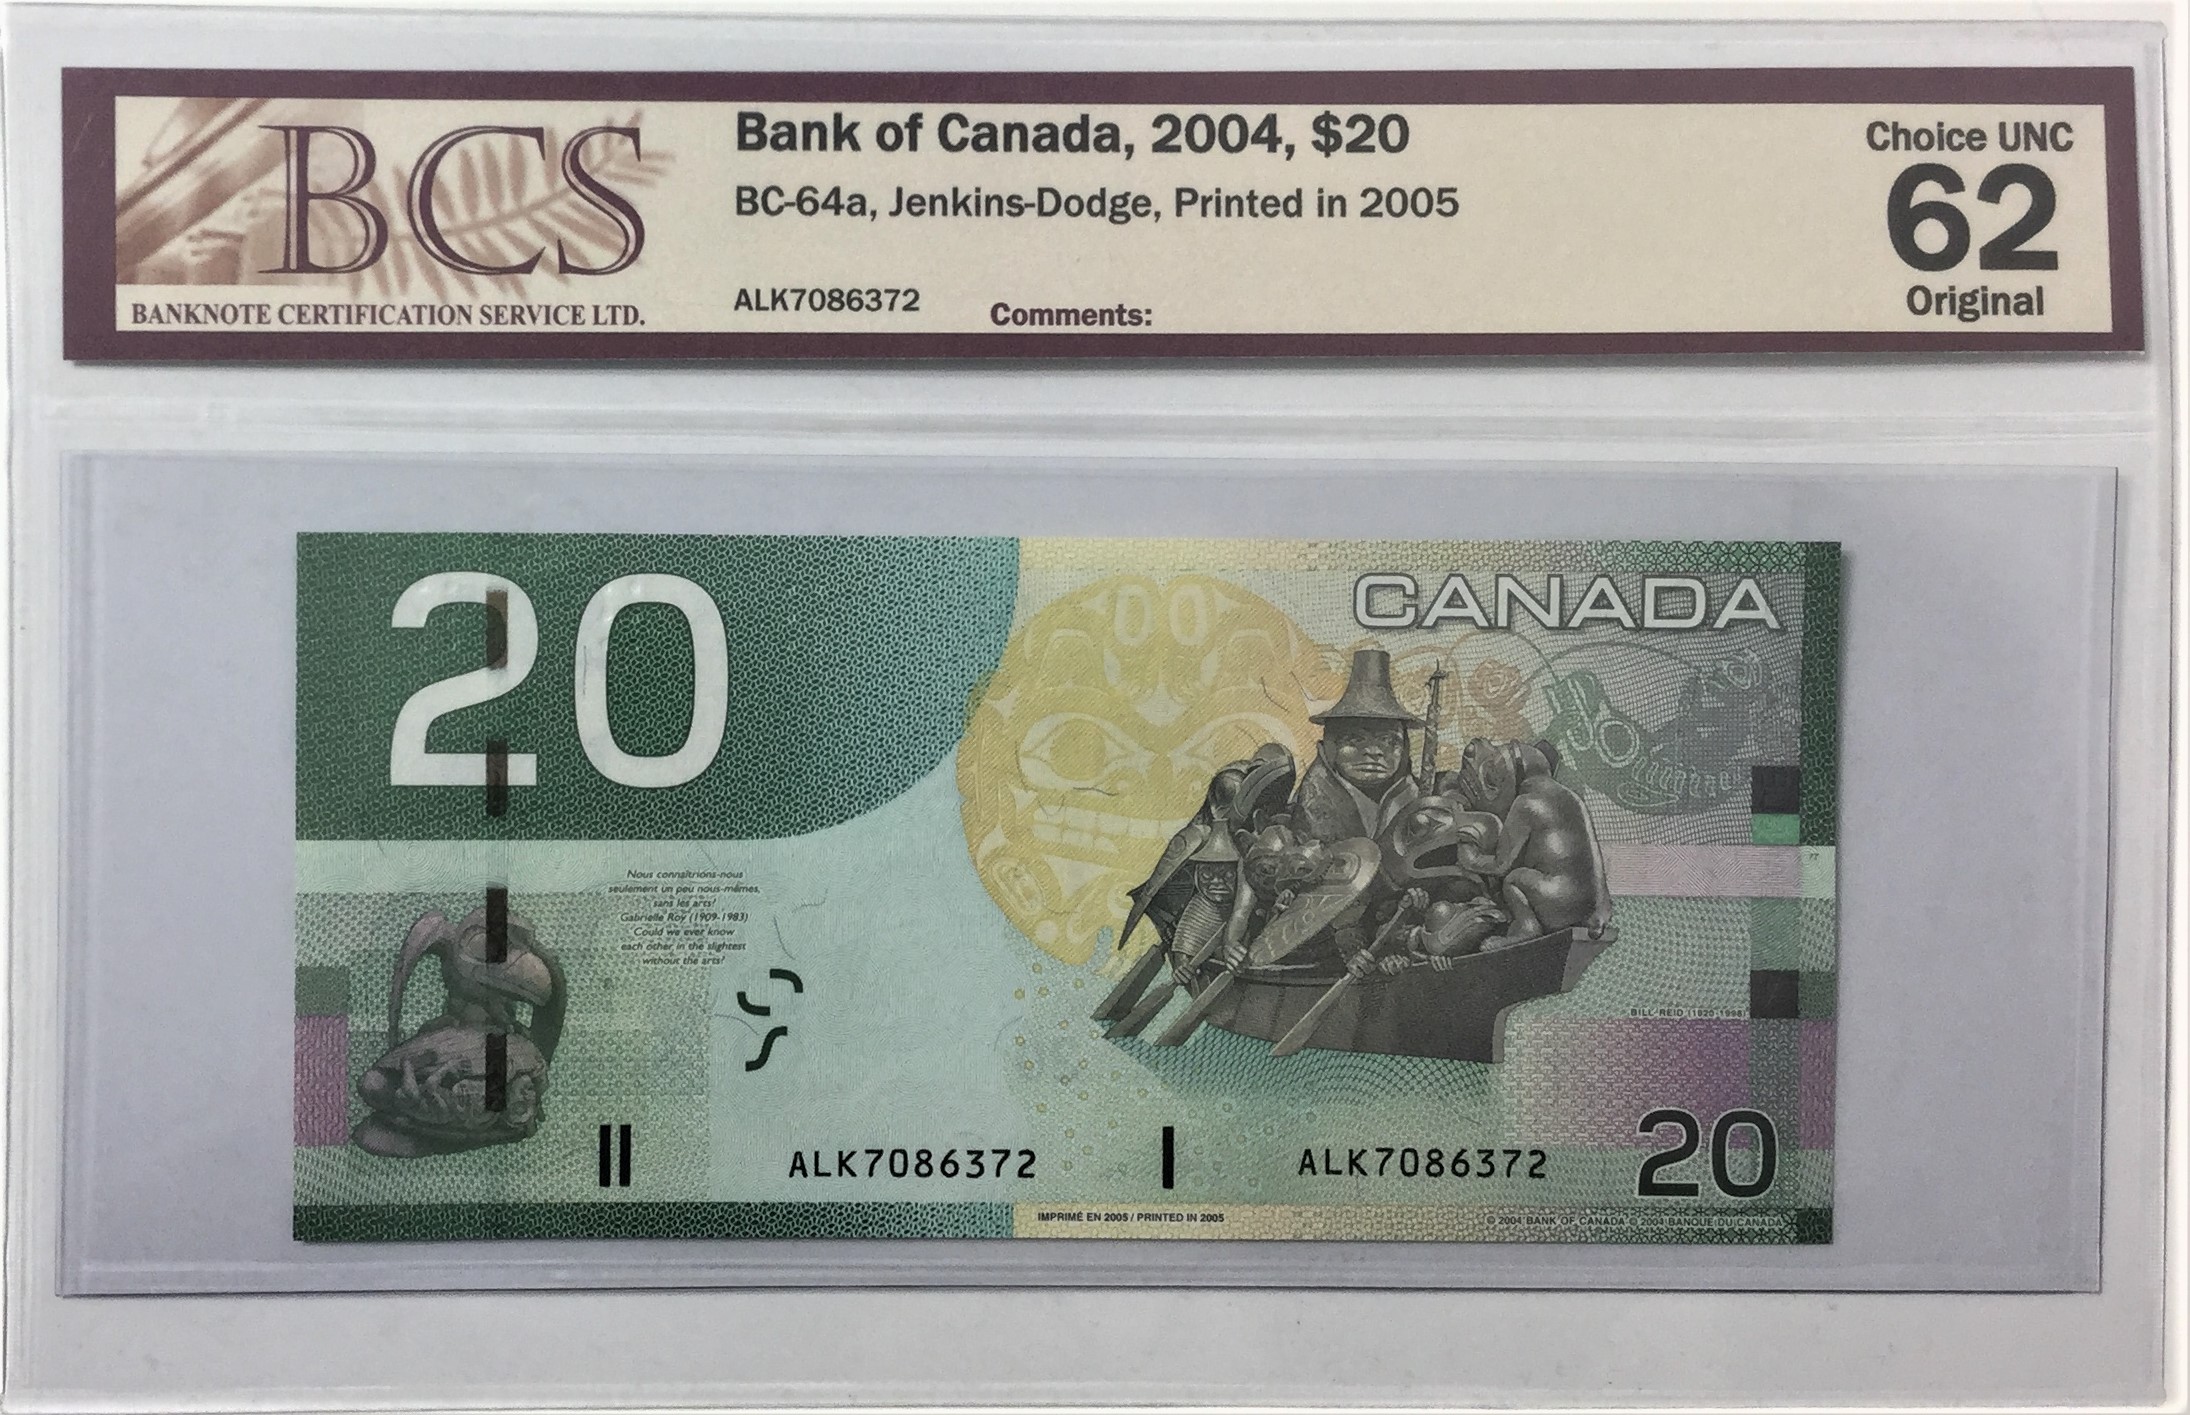 2004 Bank Of Canada $20 - Printed in 2005 BCS Graded Choice UNC 62